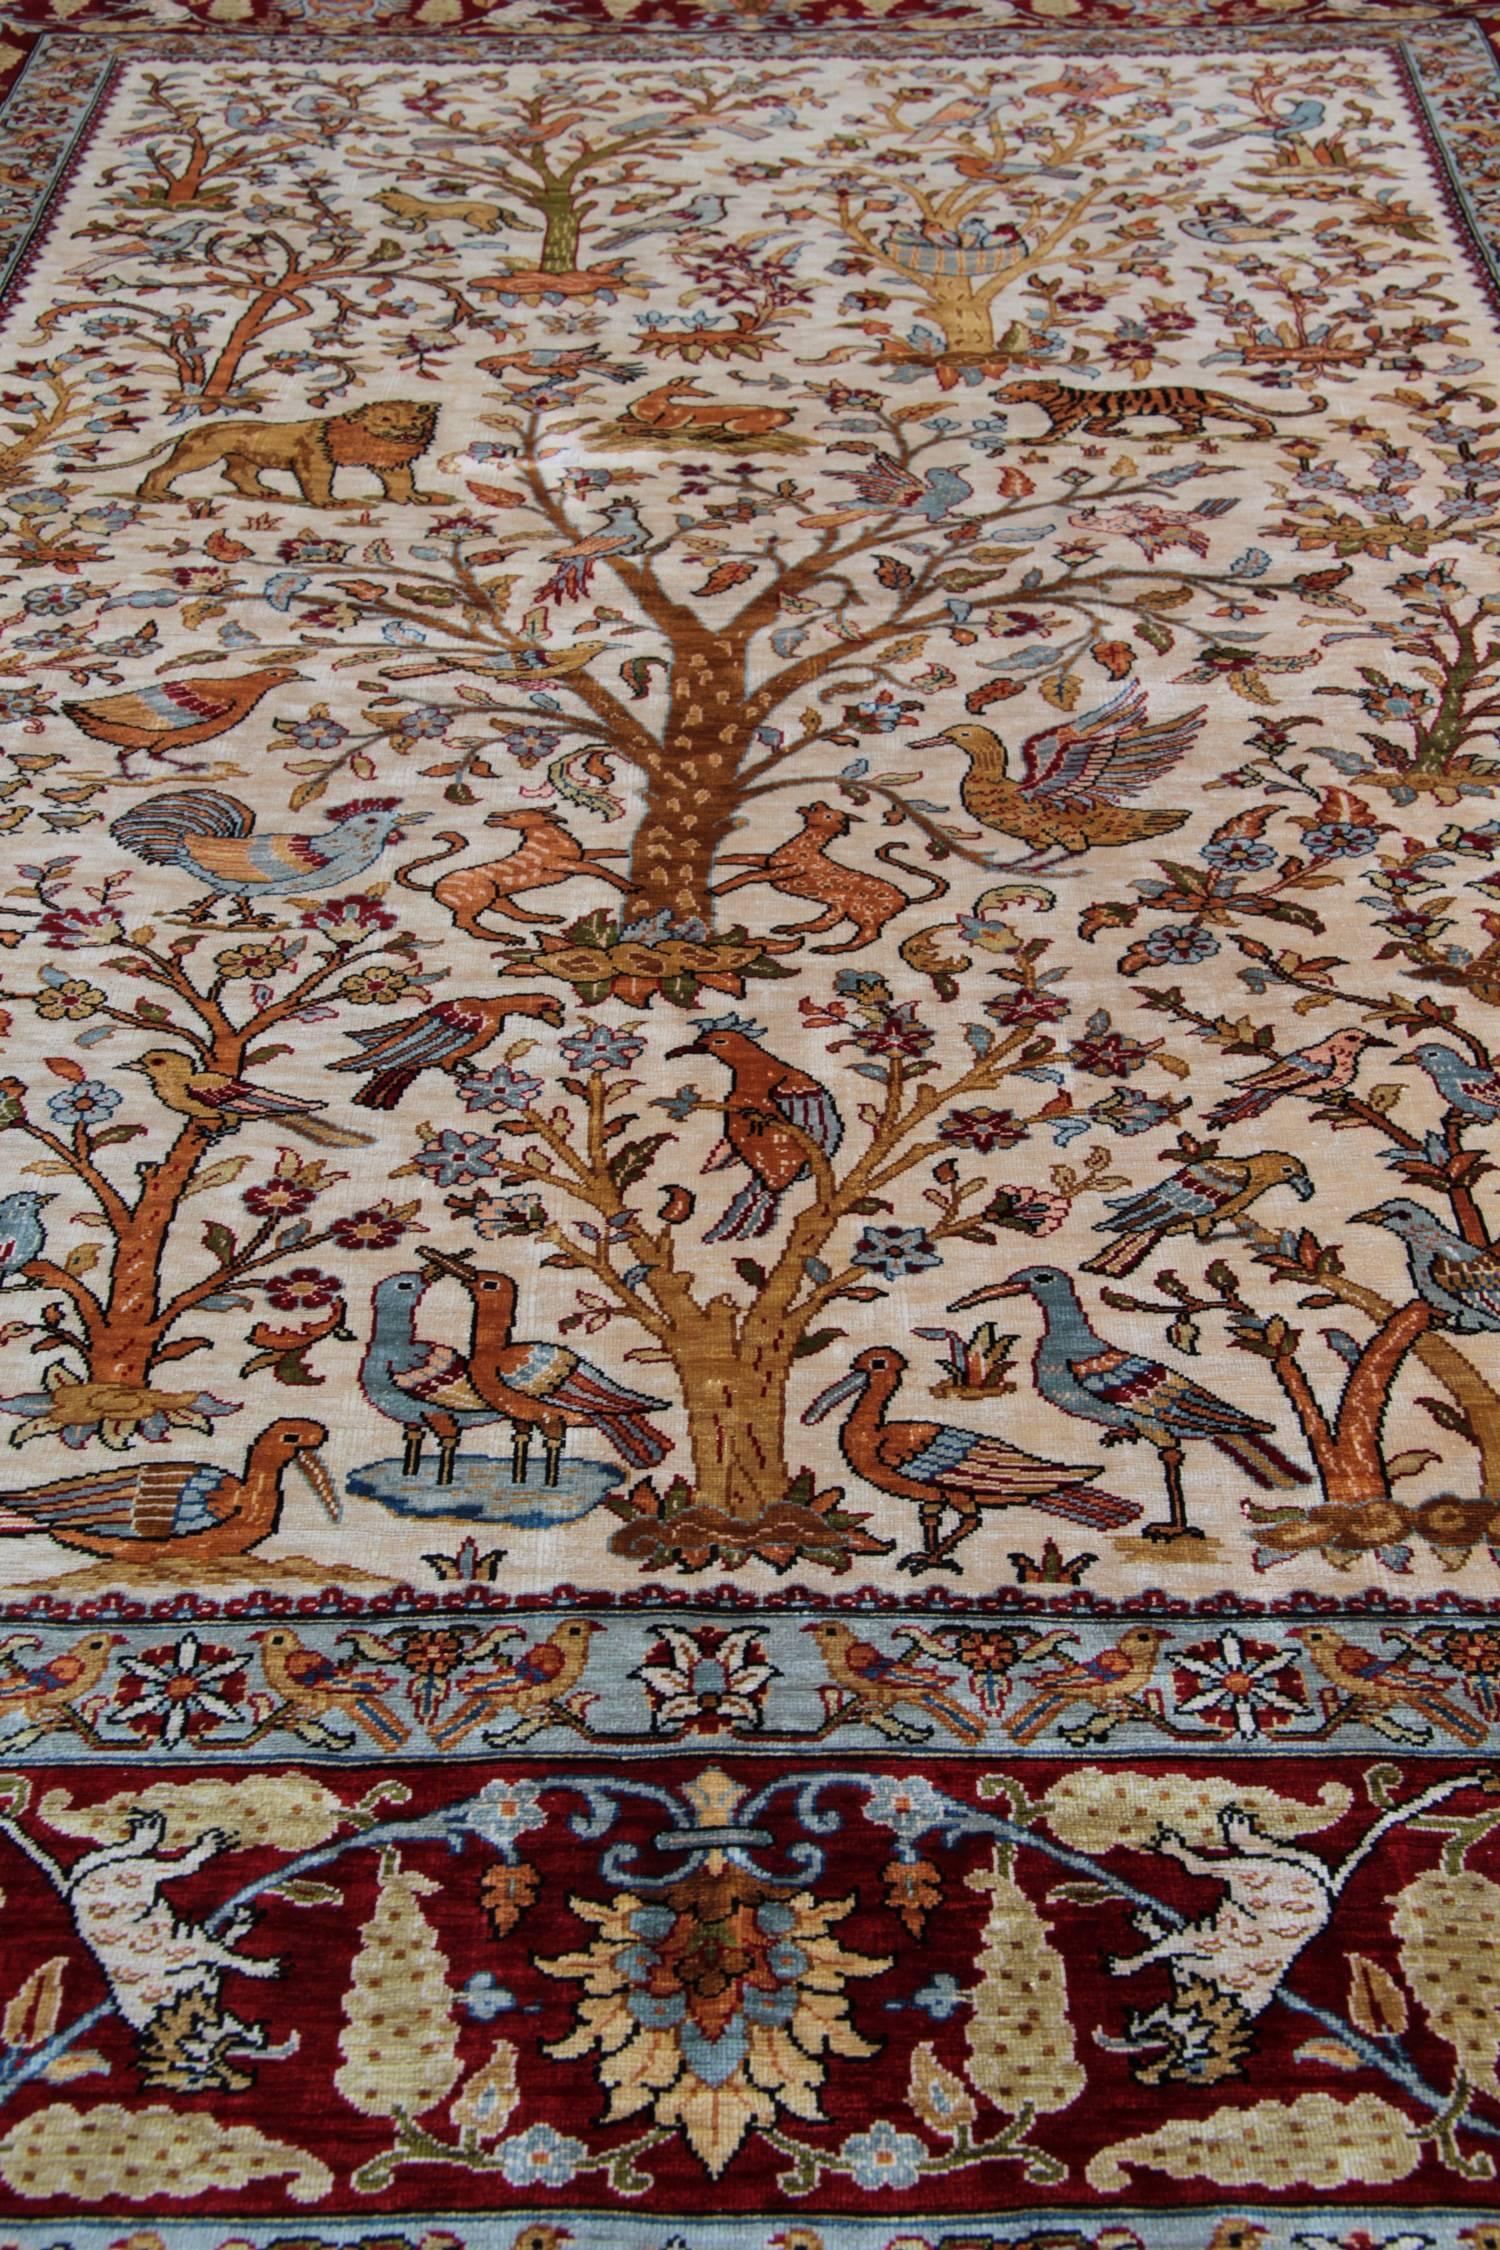 Hand-Crafted Pure Silk Rugs, Pictorial Turkish Rugs, Hereke Carpet with Signature